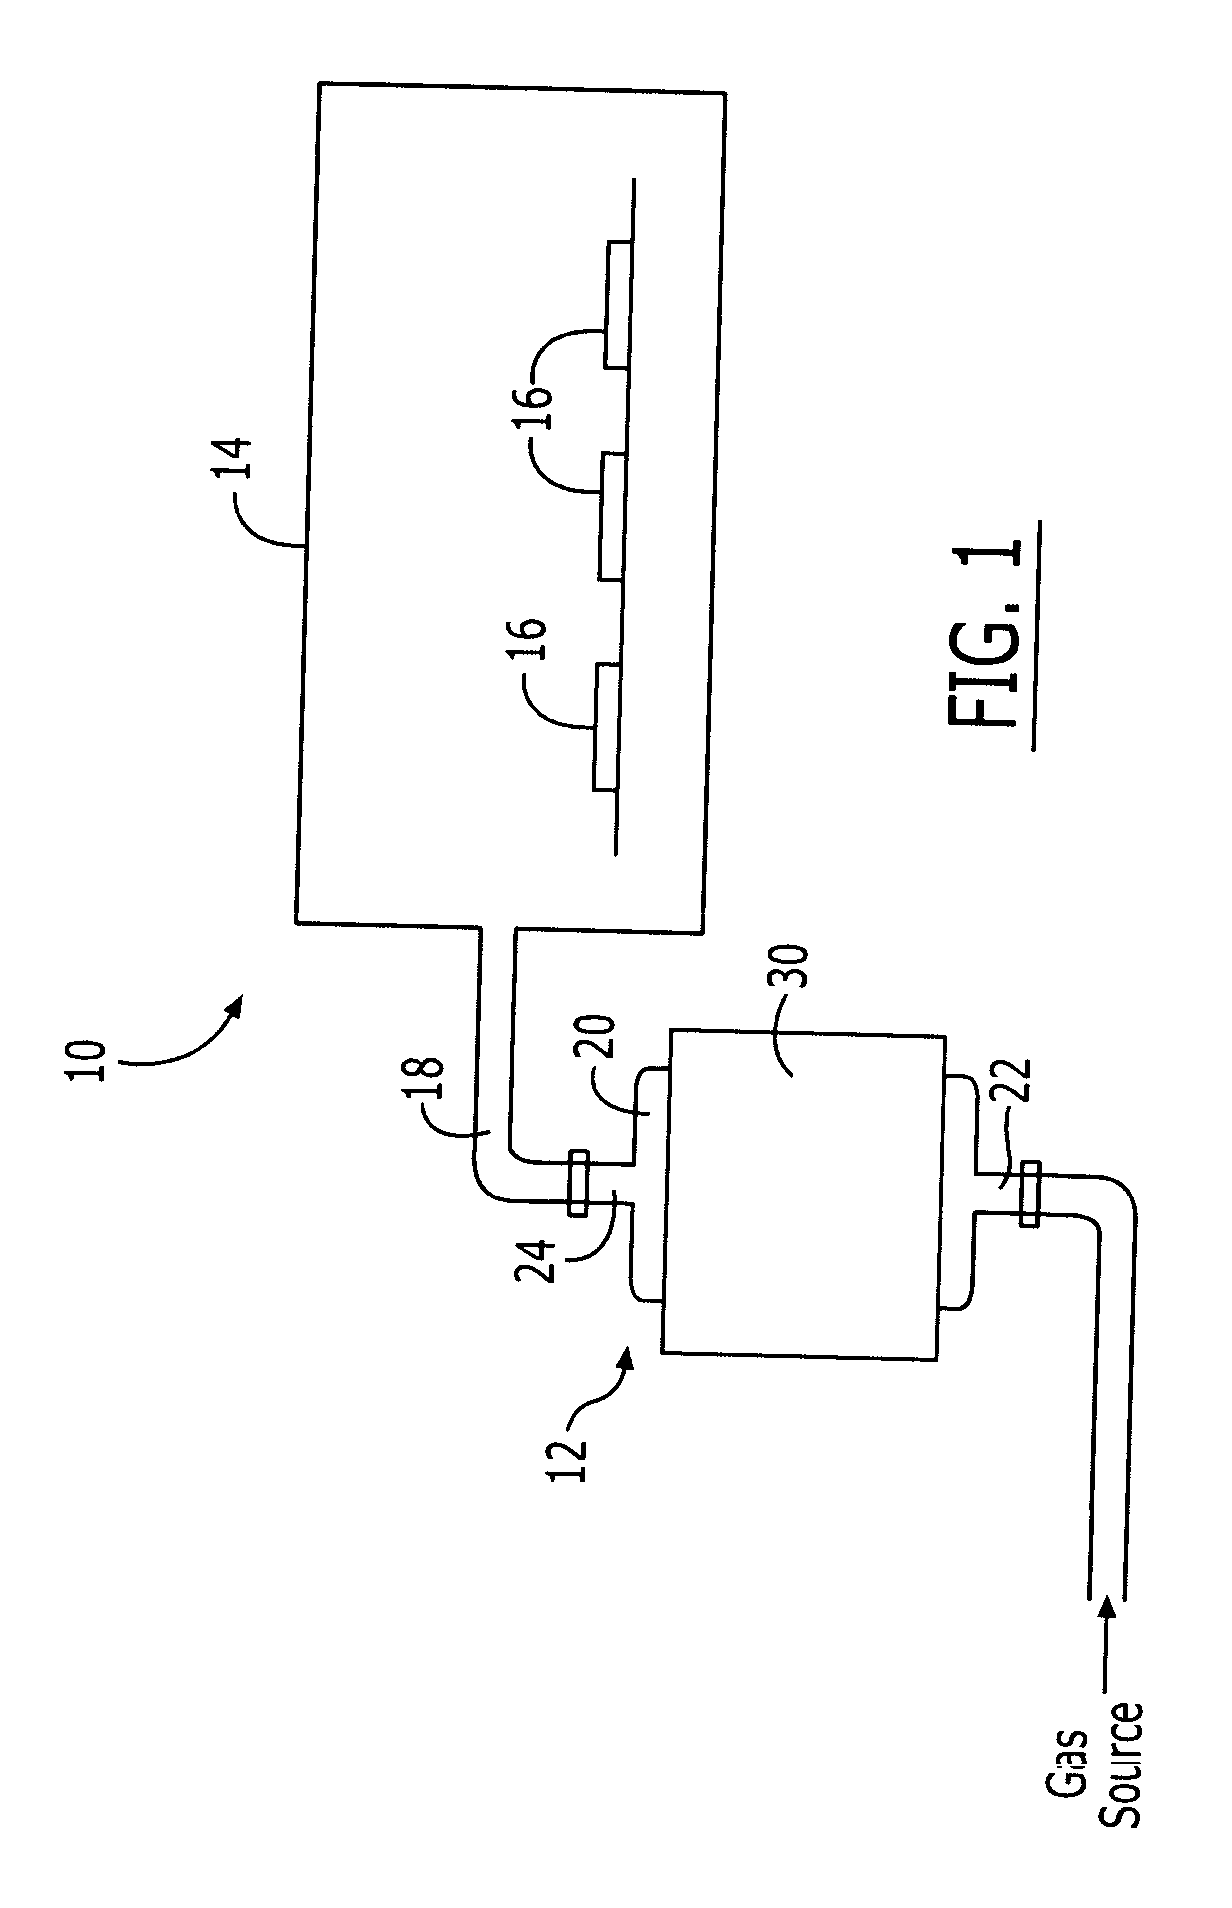 Gettering filter and associated method for removing oxygen from a gas